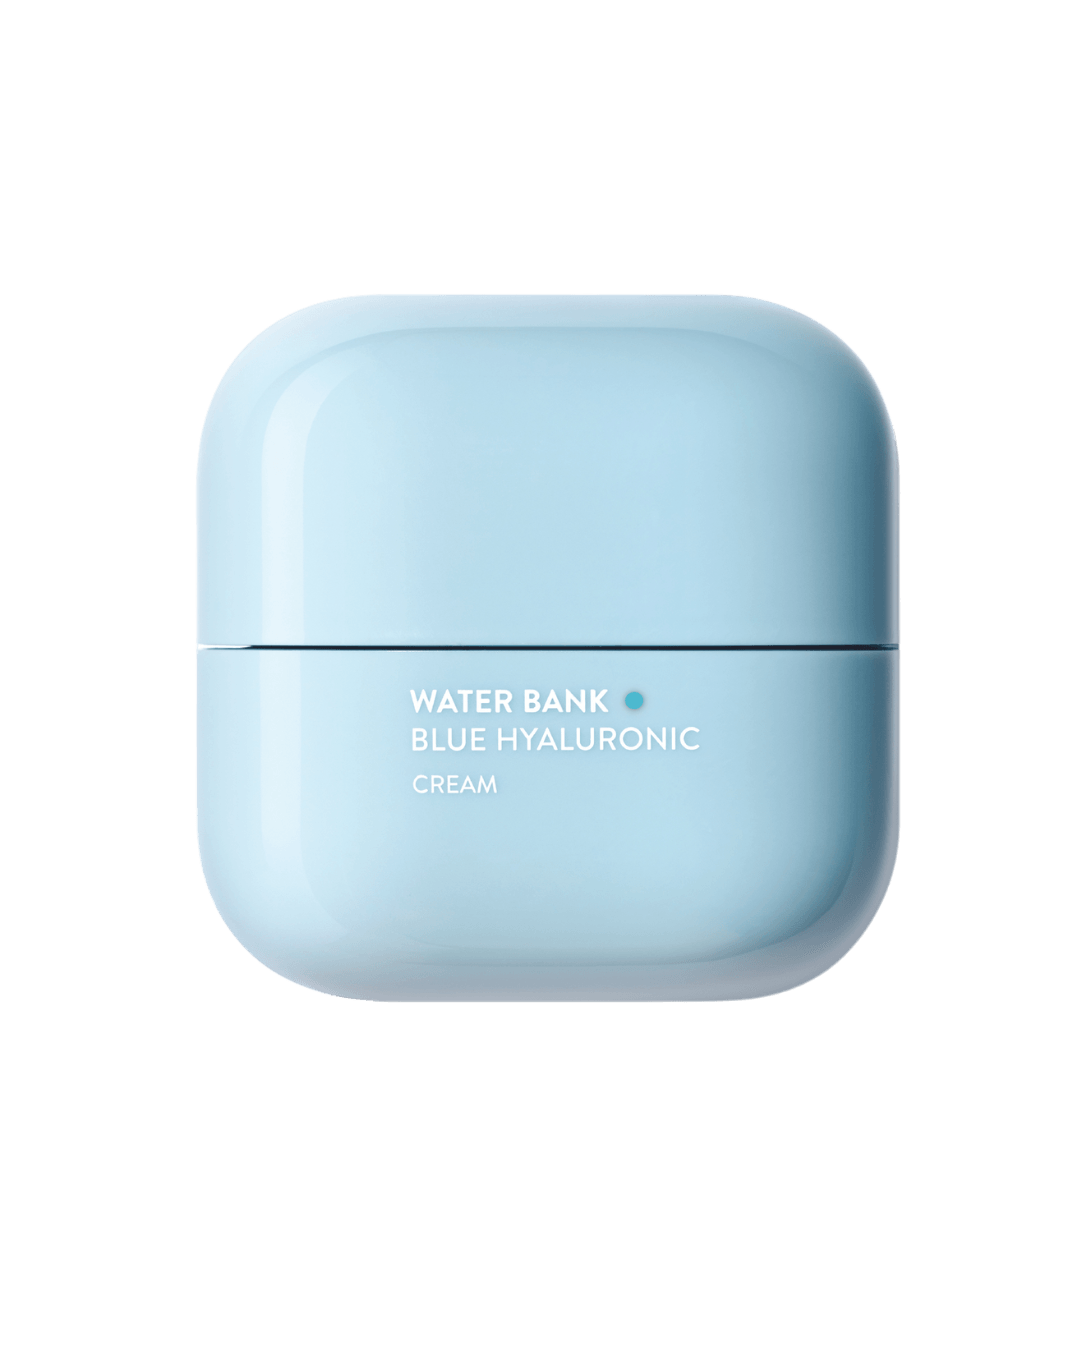 Daily Vanity Beauty Awards 2024 Best Skincare Laneige Water Bank Blue Hyaluronic Cream (For Combination To Oily Skin) Voted By Beauty Experts